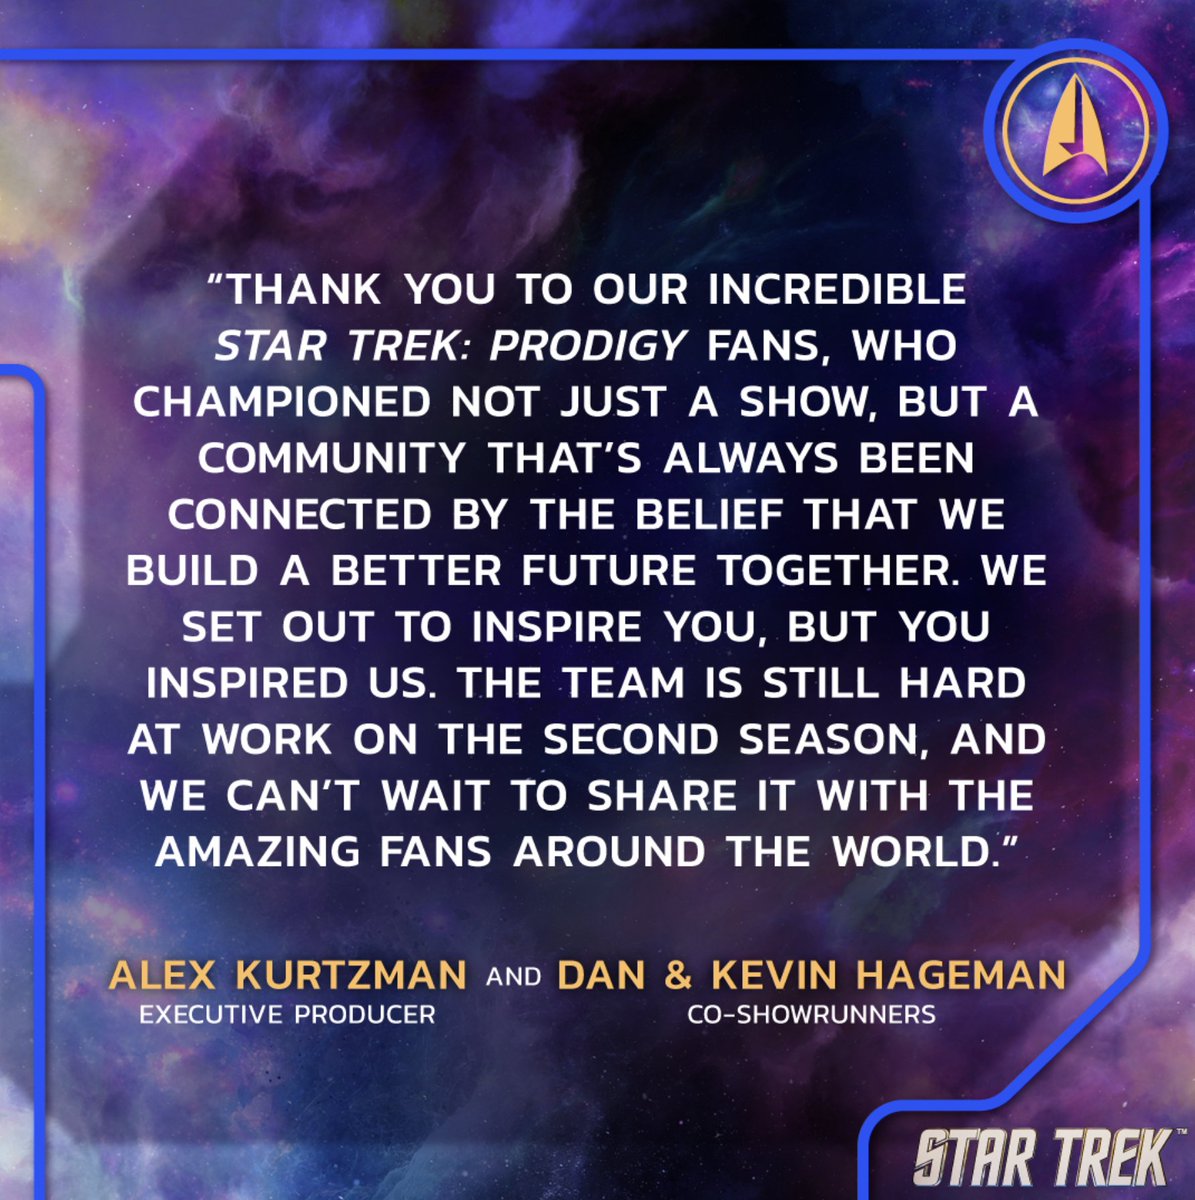 A message to our incredible fans from us and @Alex_Kurtzman. Happy to share that #StarTrekProdigy has found a NEW HOME! Star Trek: Prodigy is coming to @Netflix later in 2023, and all-new episodes in 2024. #SAVEDStarTrekProdigy